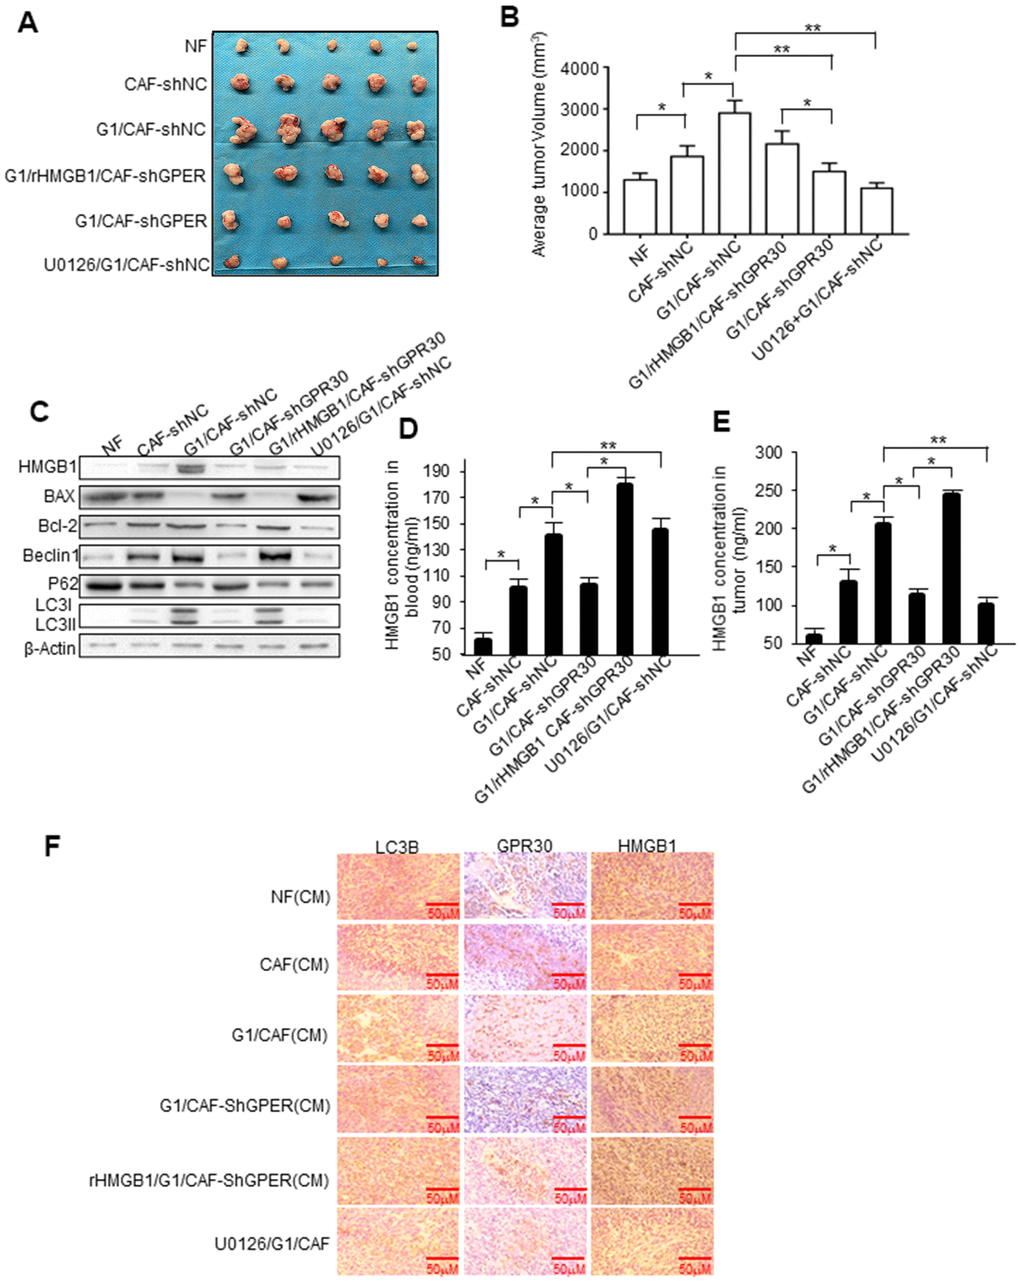 HMGB1-induced autophagy is required for mammary tumor resistance to tamoxifen in mice. MCF-7 cells mixed with CAFs or engineered CAFs (CAF/sh-NC, CAF/sh-GPR30) were subcutaneously transplanted into nude mice. Mice were treated with tamoxifen as described in the Materials and Methods. (A) Tumor size in mice; mean ± SE of triplicate representative experiments. (B) Tumor volume was assessed. (C) Autophagy- and apoptosis-related markers in xenografts were quantified by western blotting. U0126 injected into mice at 25 mmol/kg. (D, E) The concentration of HMGB1 in xenograft tissues and blood from mice. (F) Representative images of LC3B, GPR30, and HMGB1 examined by IHC staining are shown; Scale bar, 50 μm.